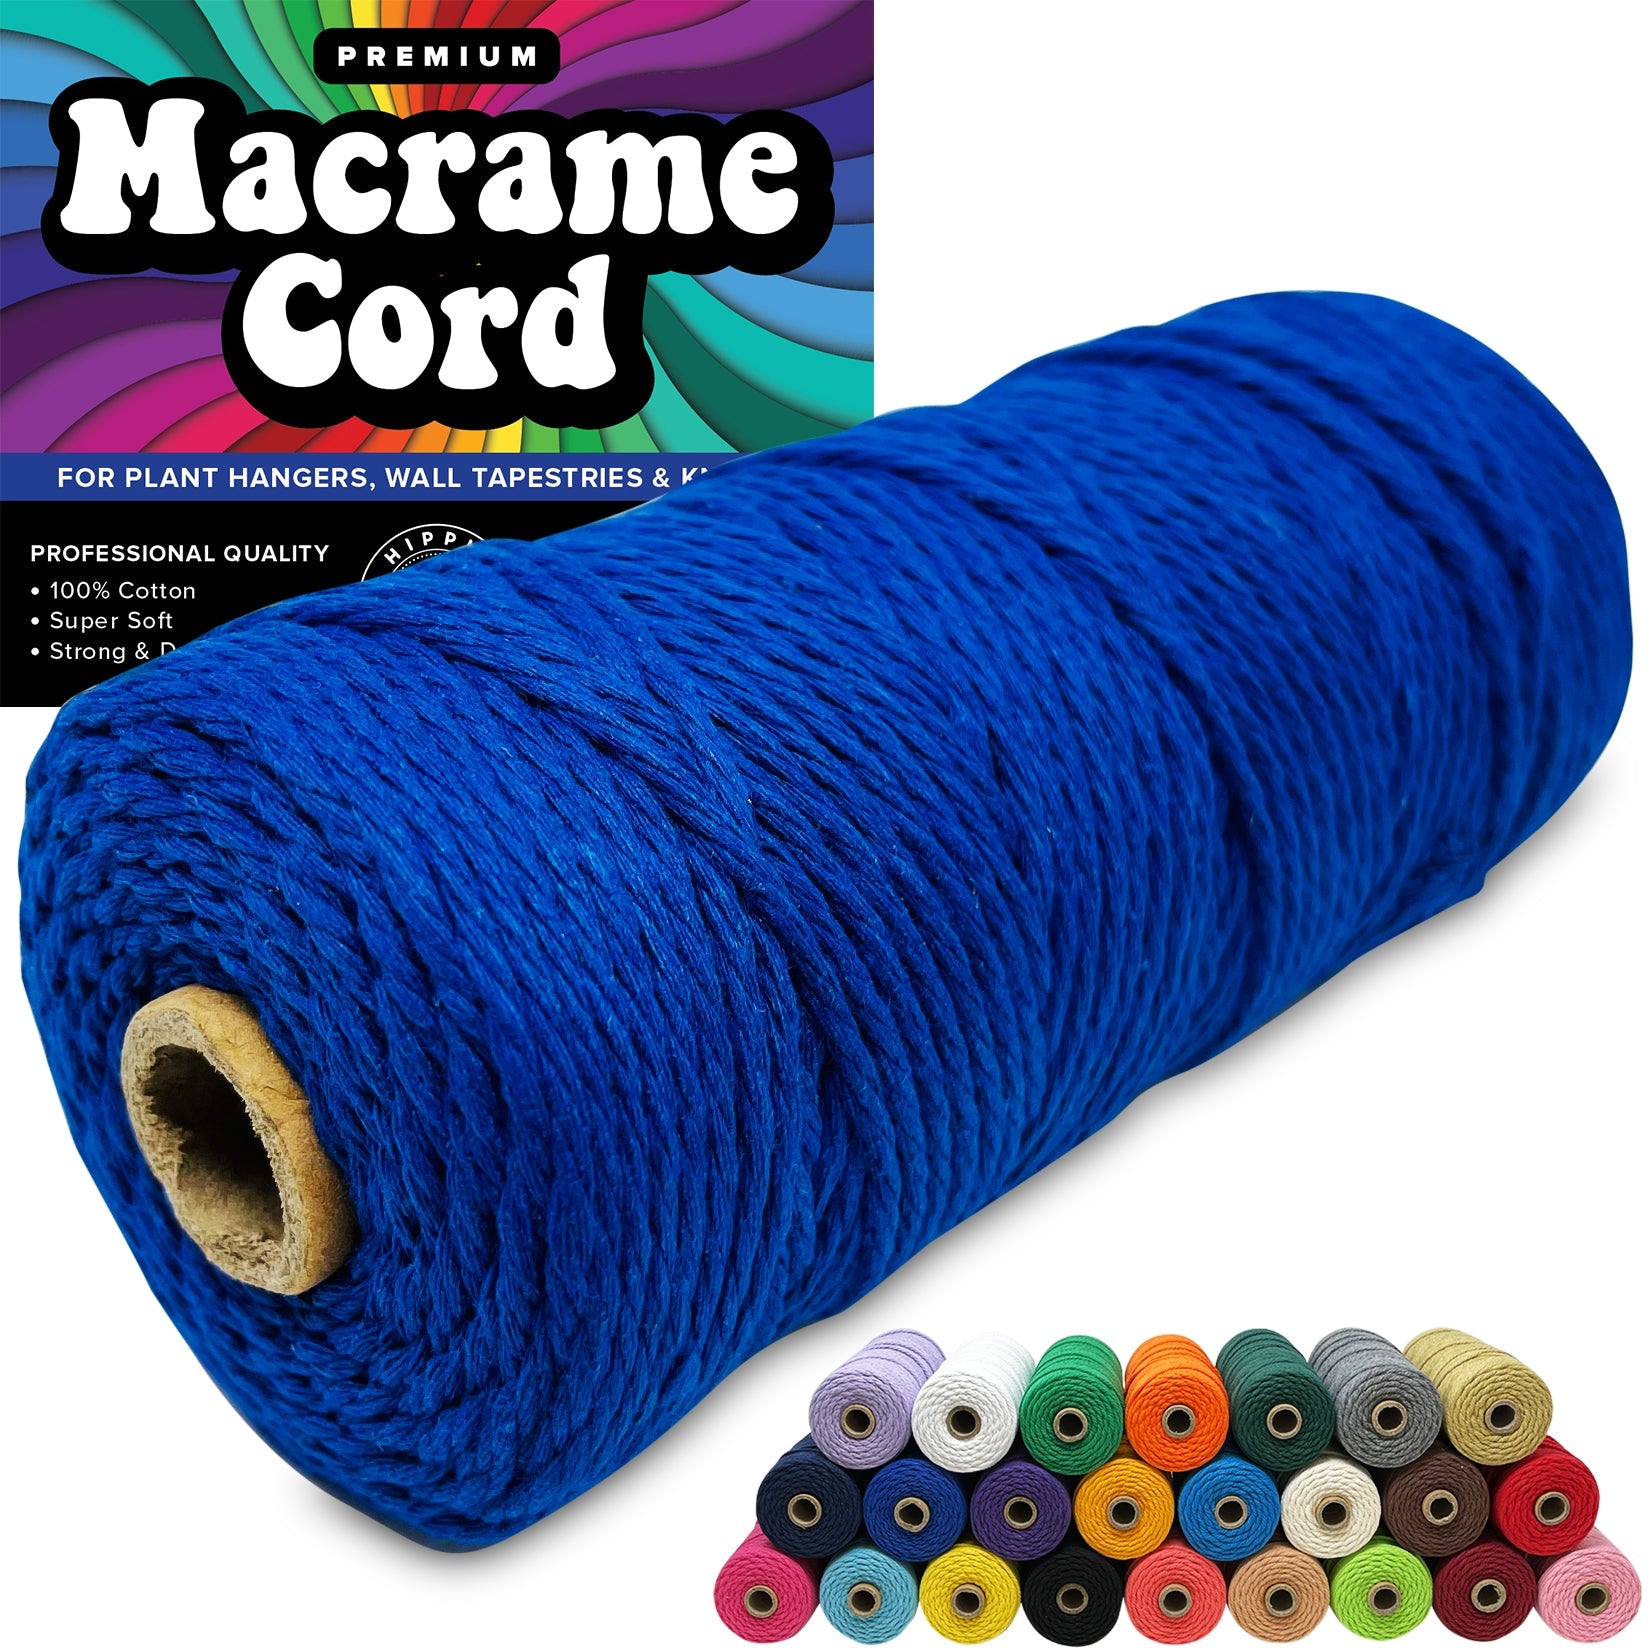 Blue 100% Cotton Cord Rope for Macrame 3mm Natural and Colored Craft String Yarn Materials 325 Feet, Size: Small